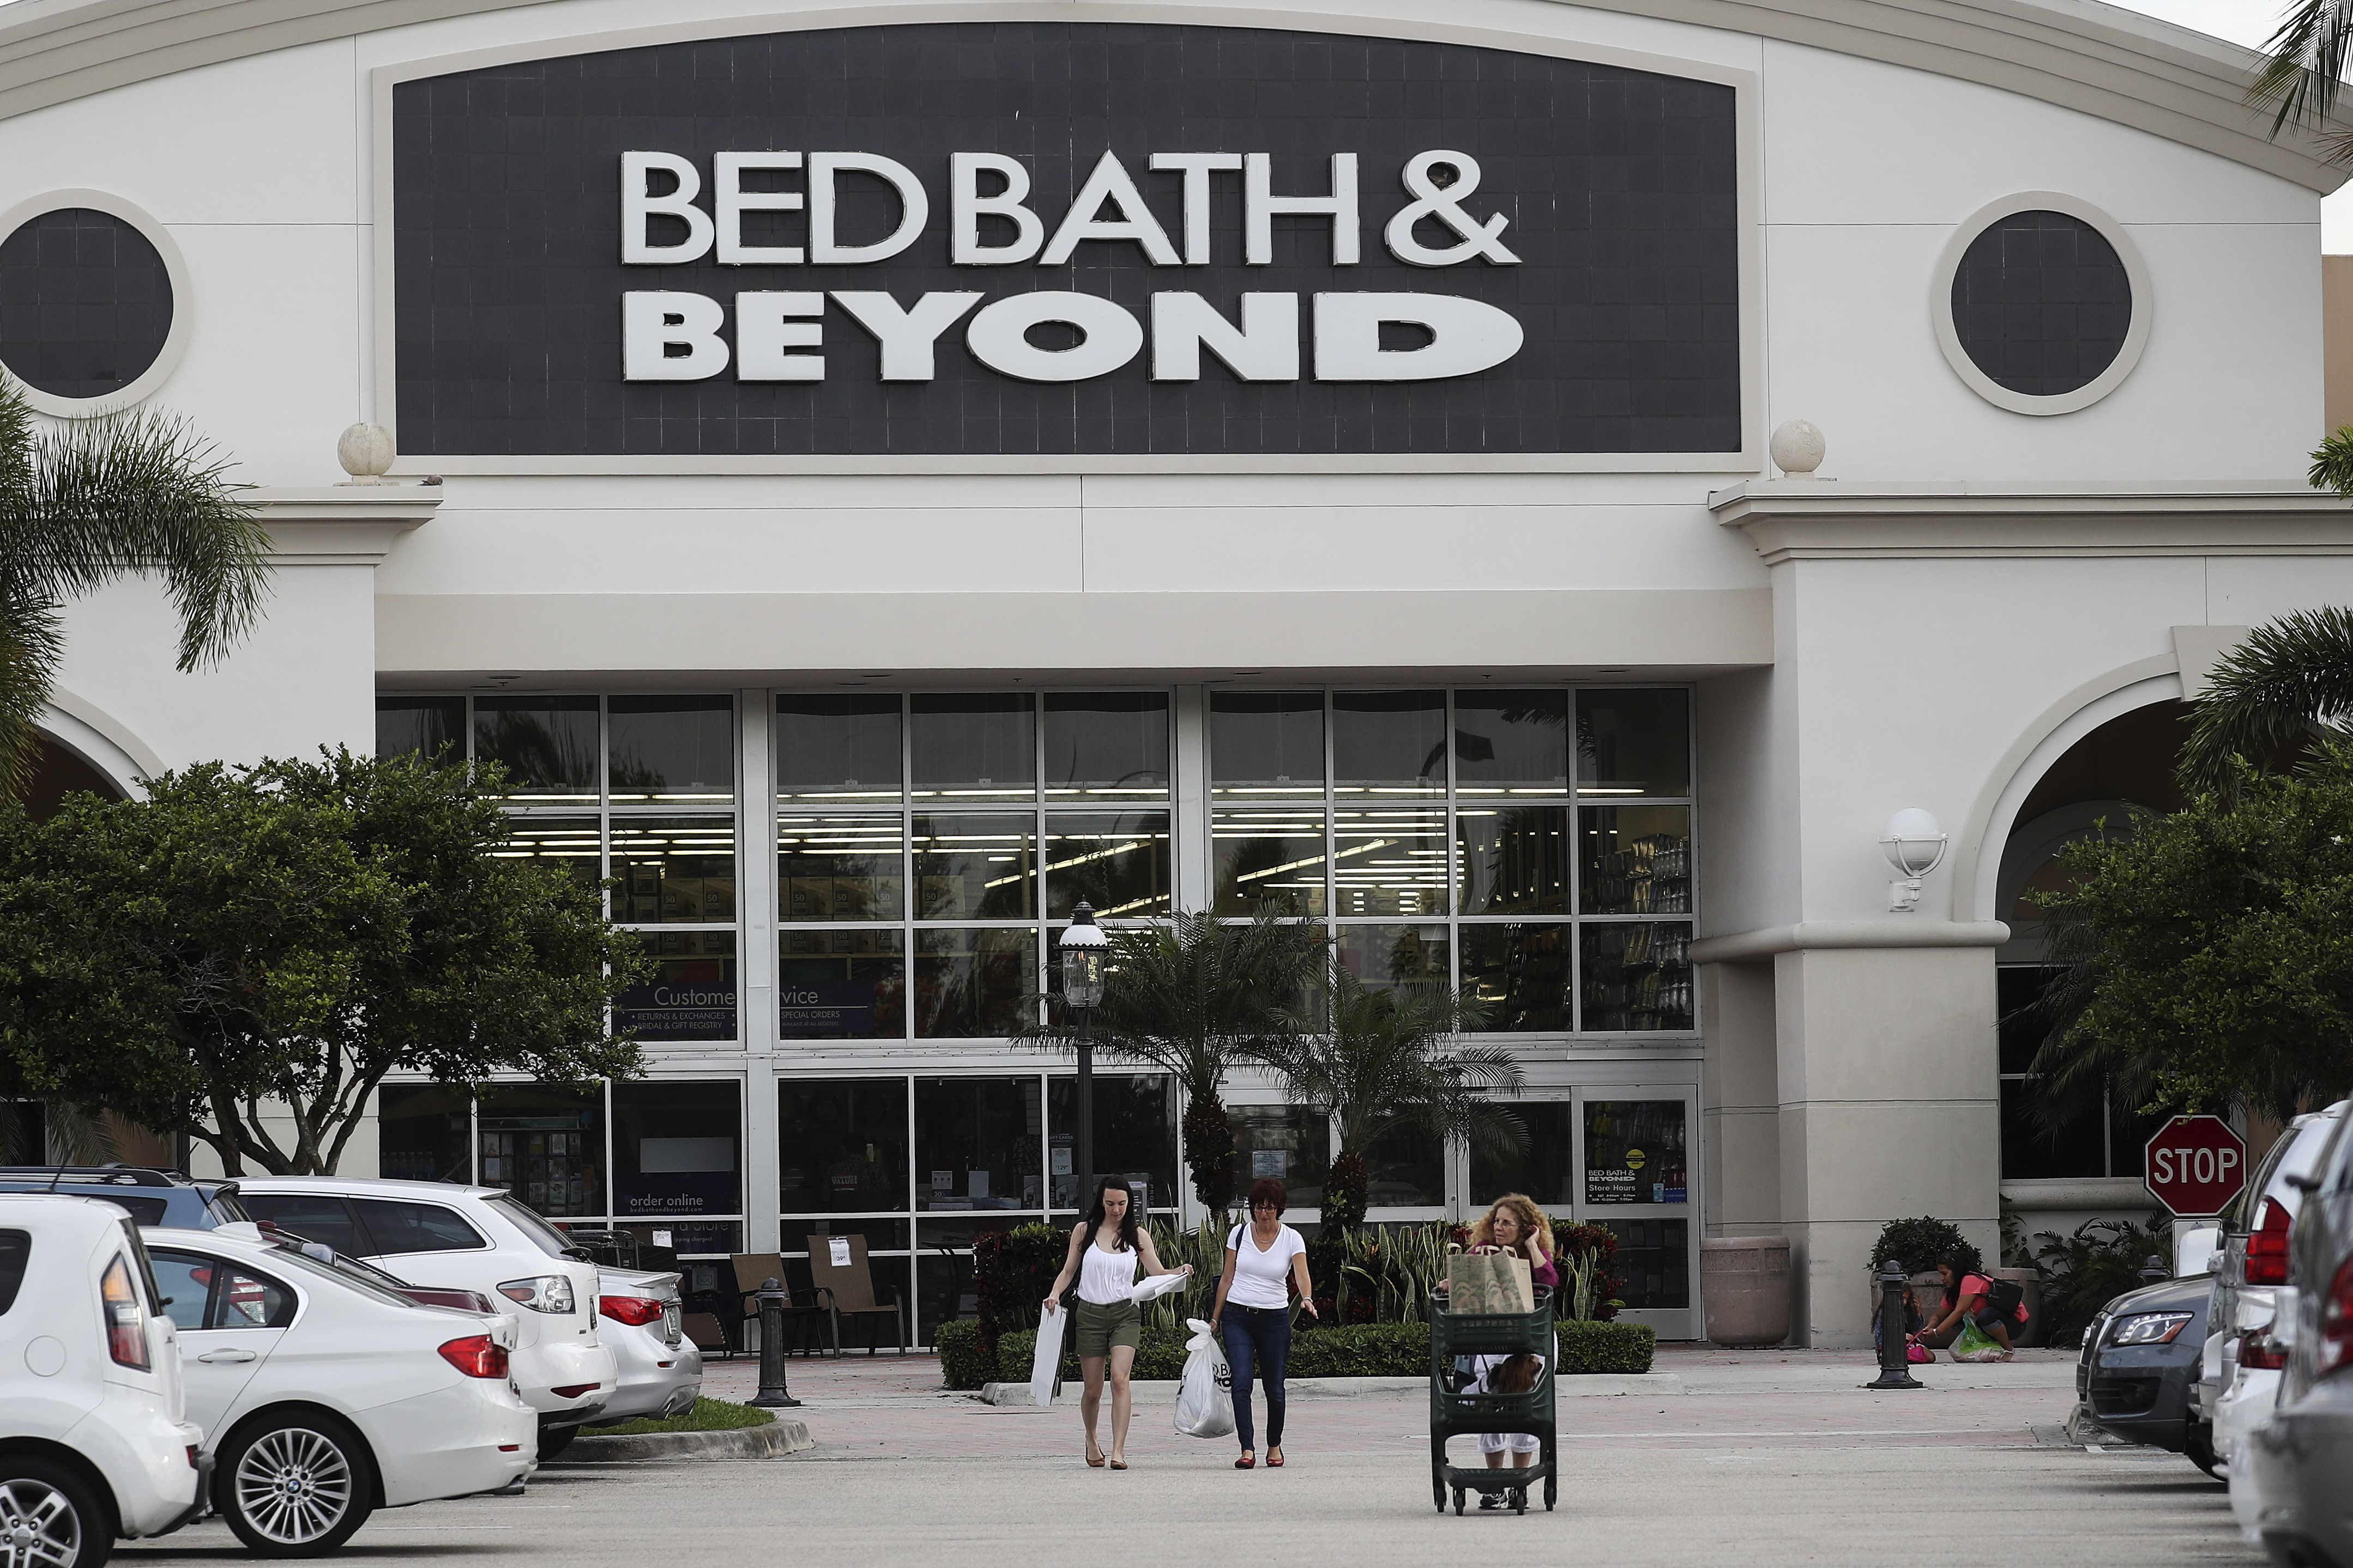 A Bed Bath & Beyond store logo is pictured on a building in Boca Raton, Florida